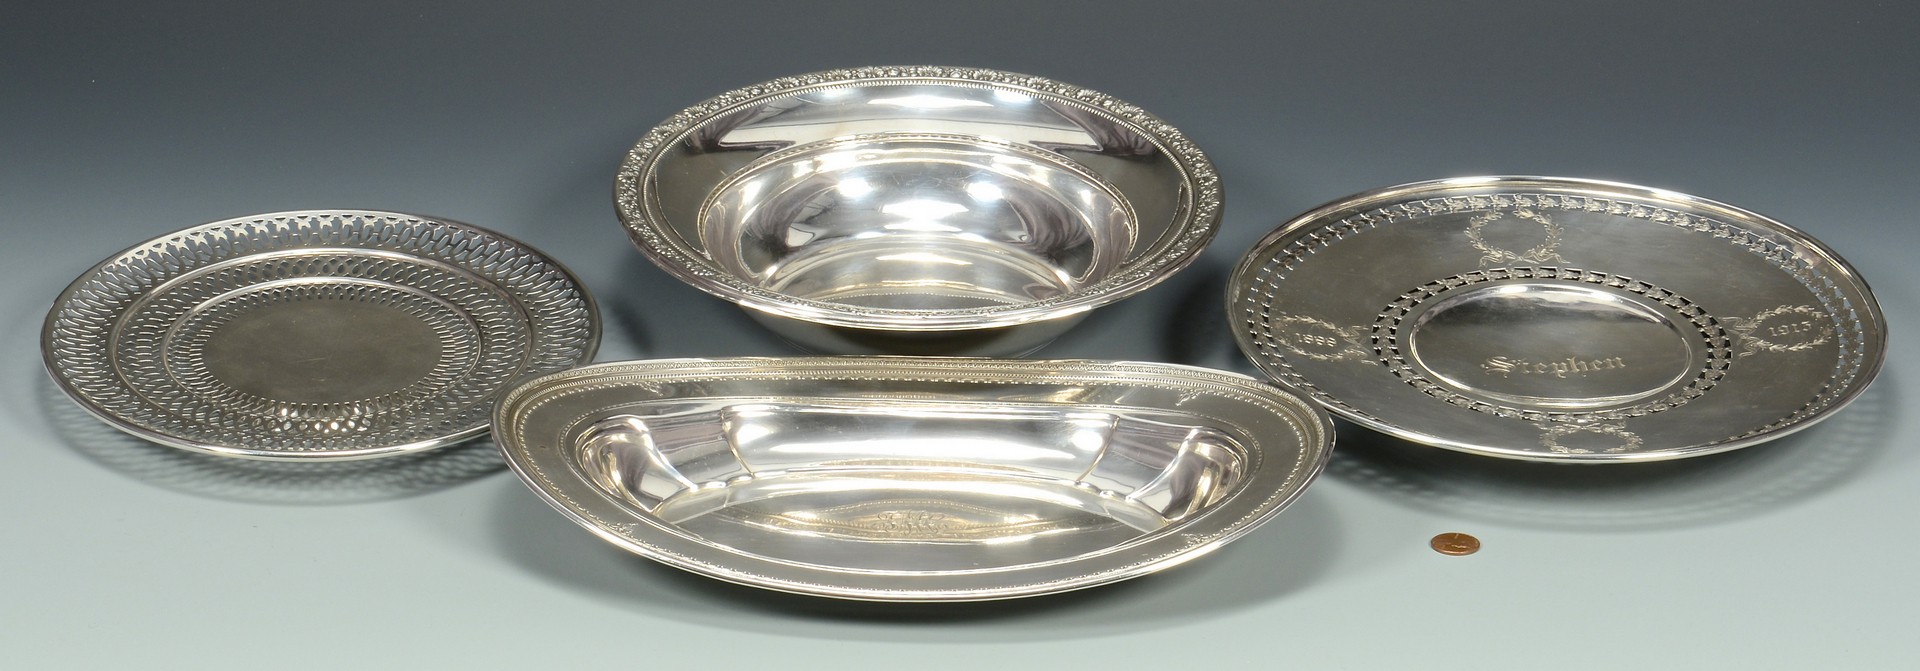 Lot 679: 4 Sterling Silver Serving Items